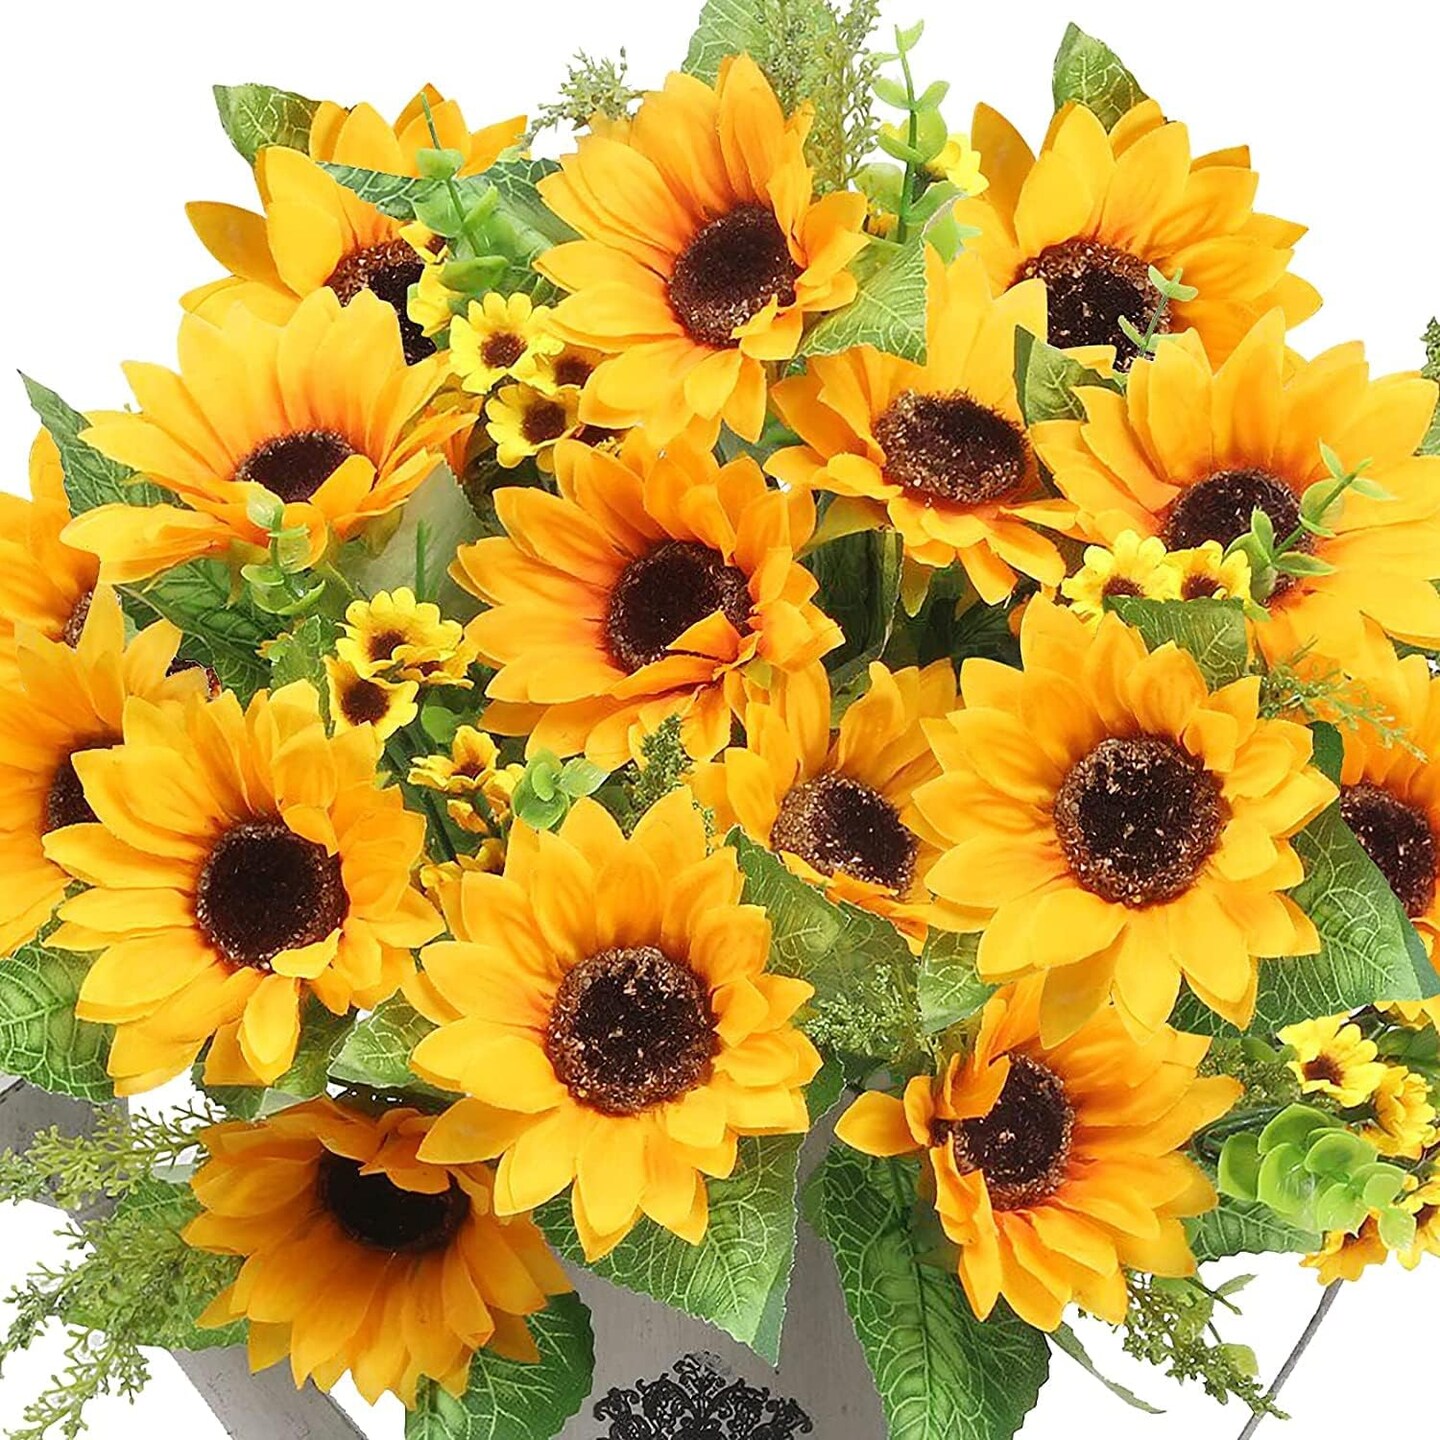 Artificial Sunflower Bouquets, 2 Bunches Fake Wildflowers for Baby Shower, Home, Wedding, Spring Decor, Bride Holding Flowers, DIY Garden Craft Art Decor